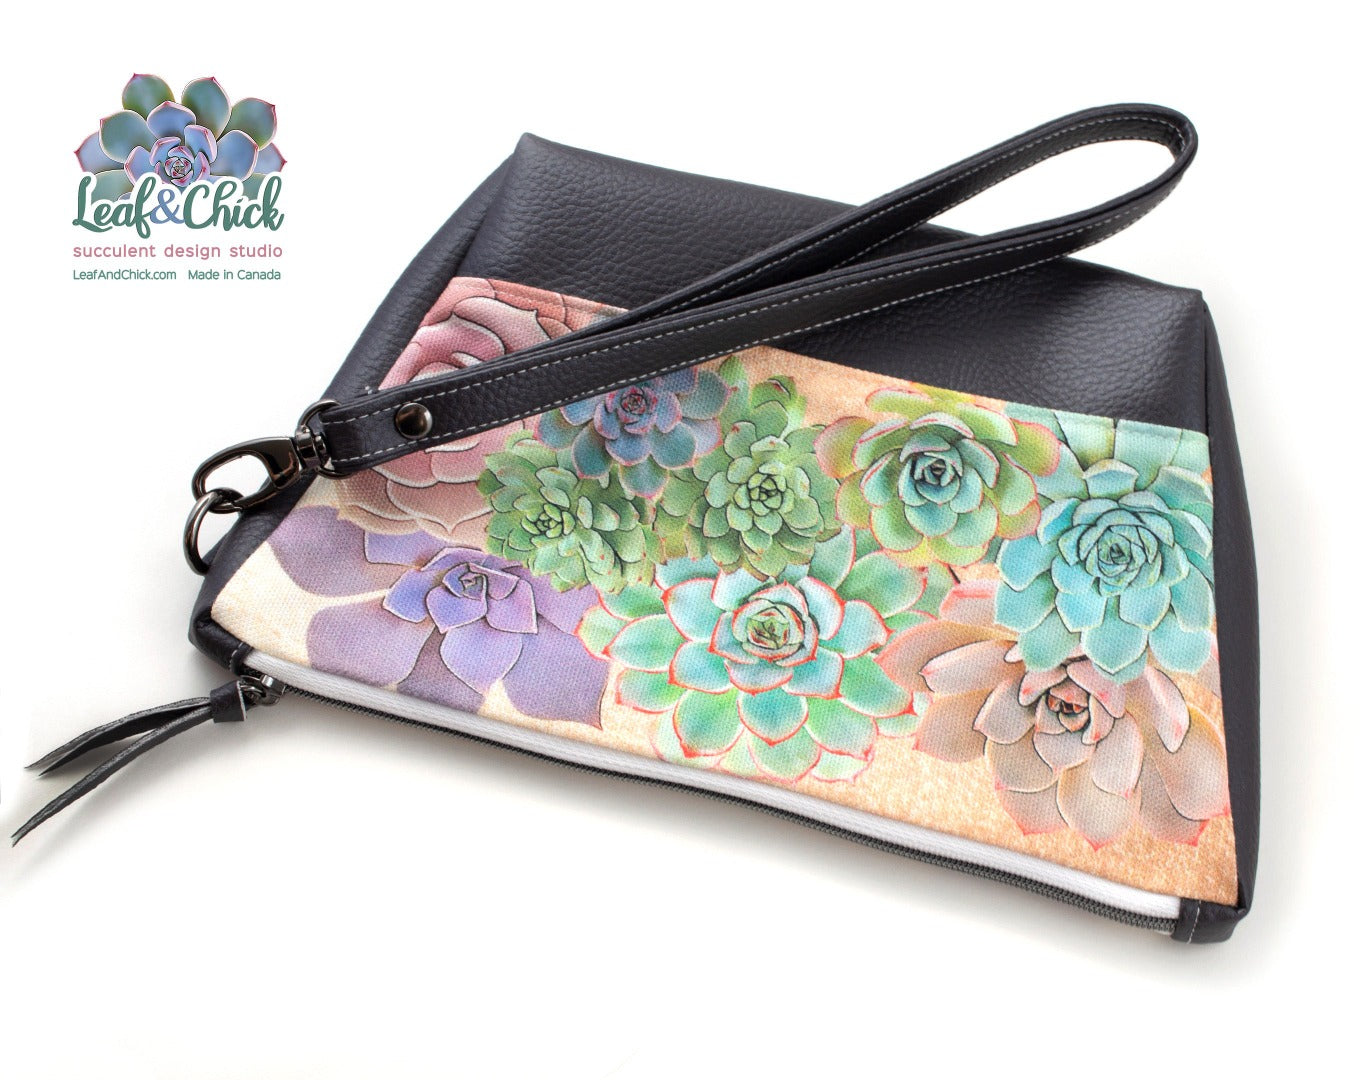 succulent purse bag with original art on cotton from Leaf & Chick